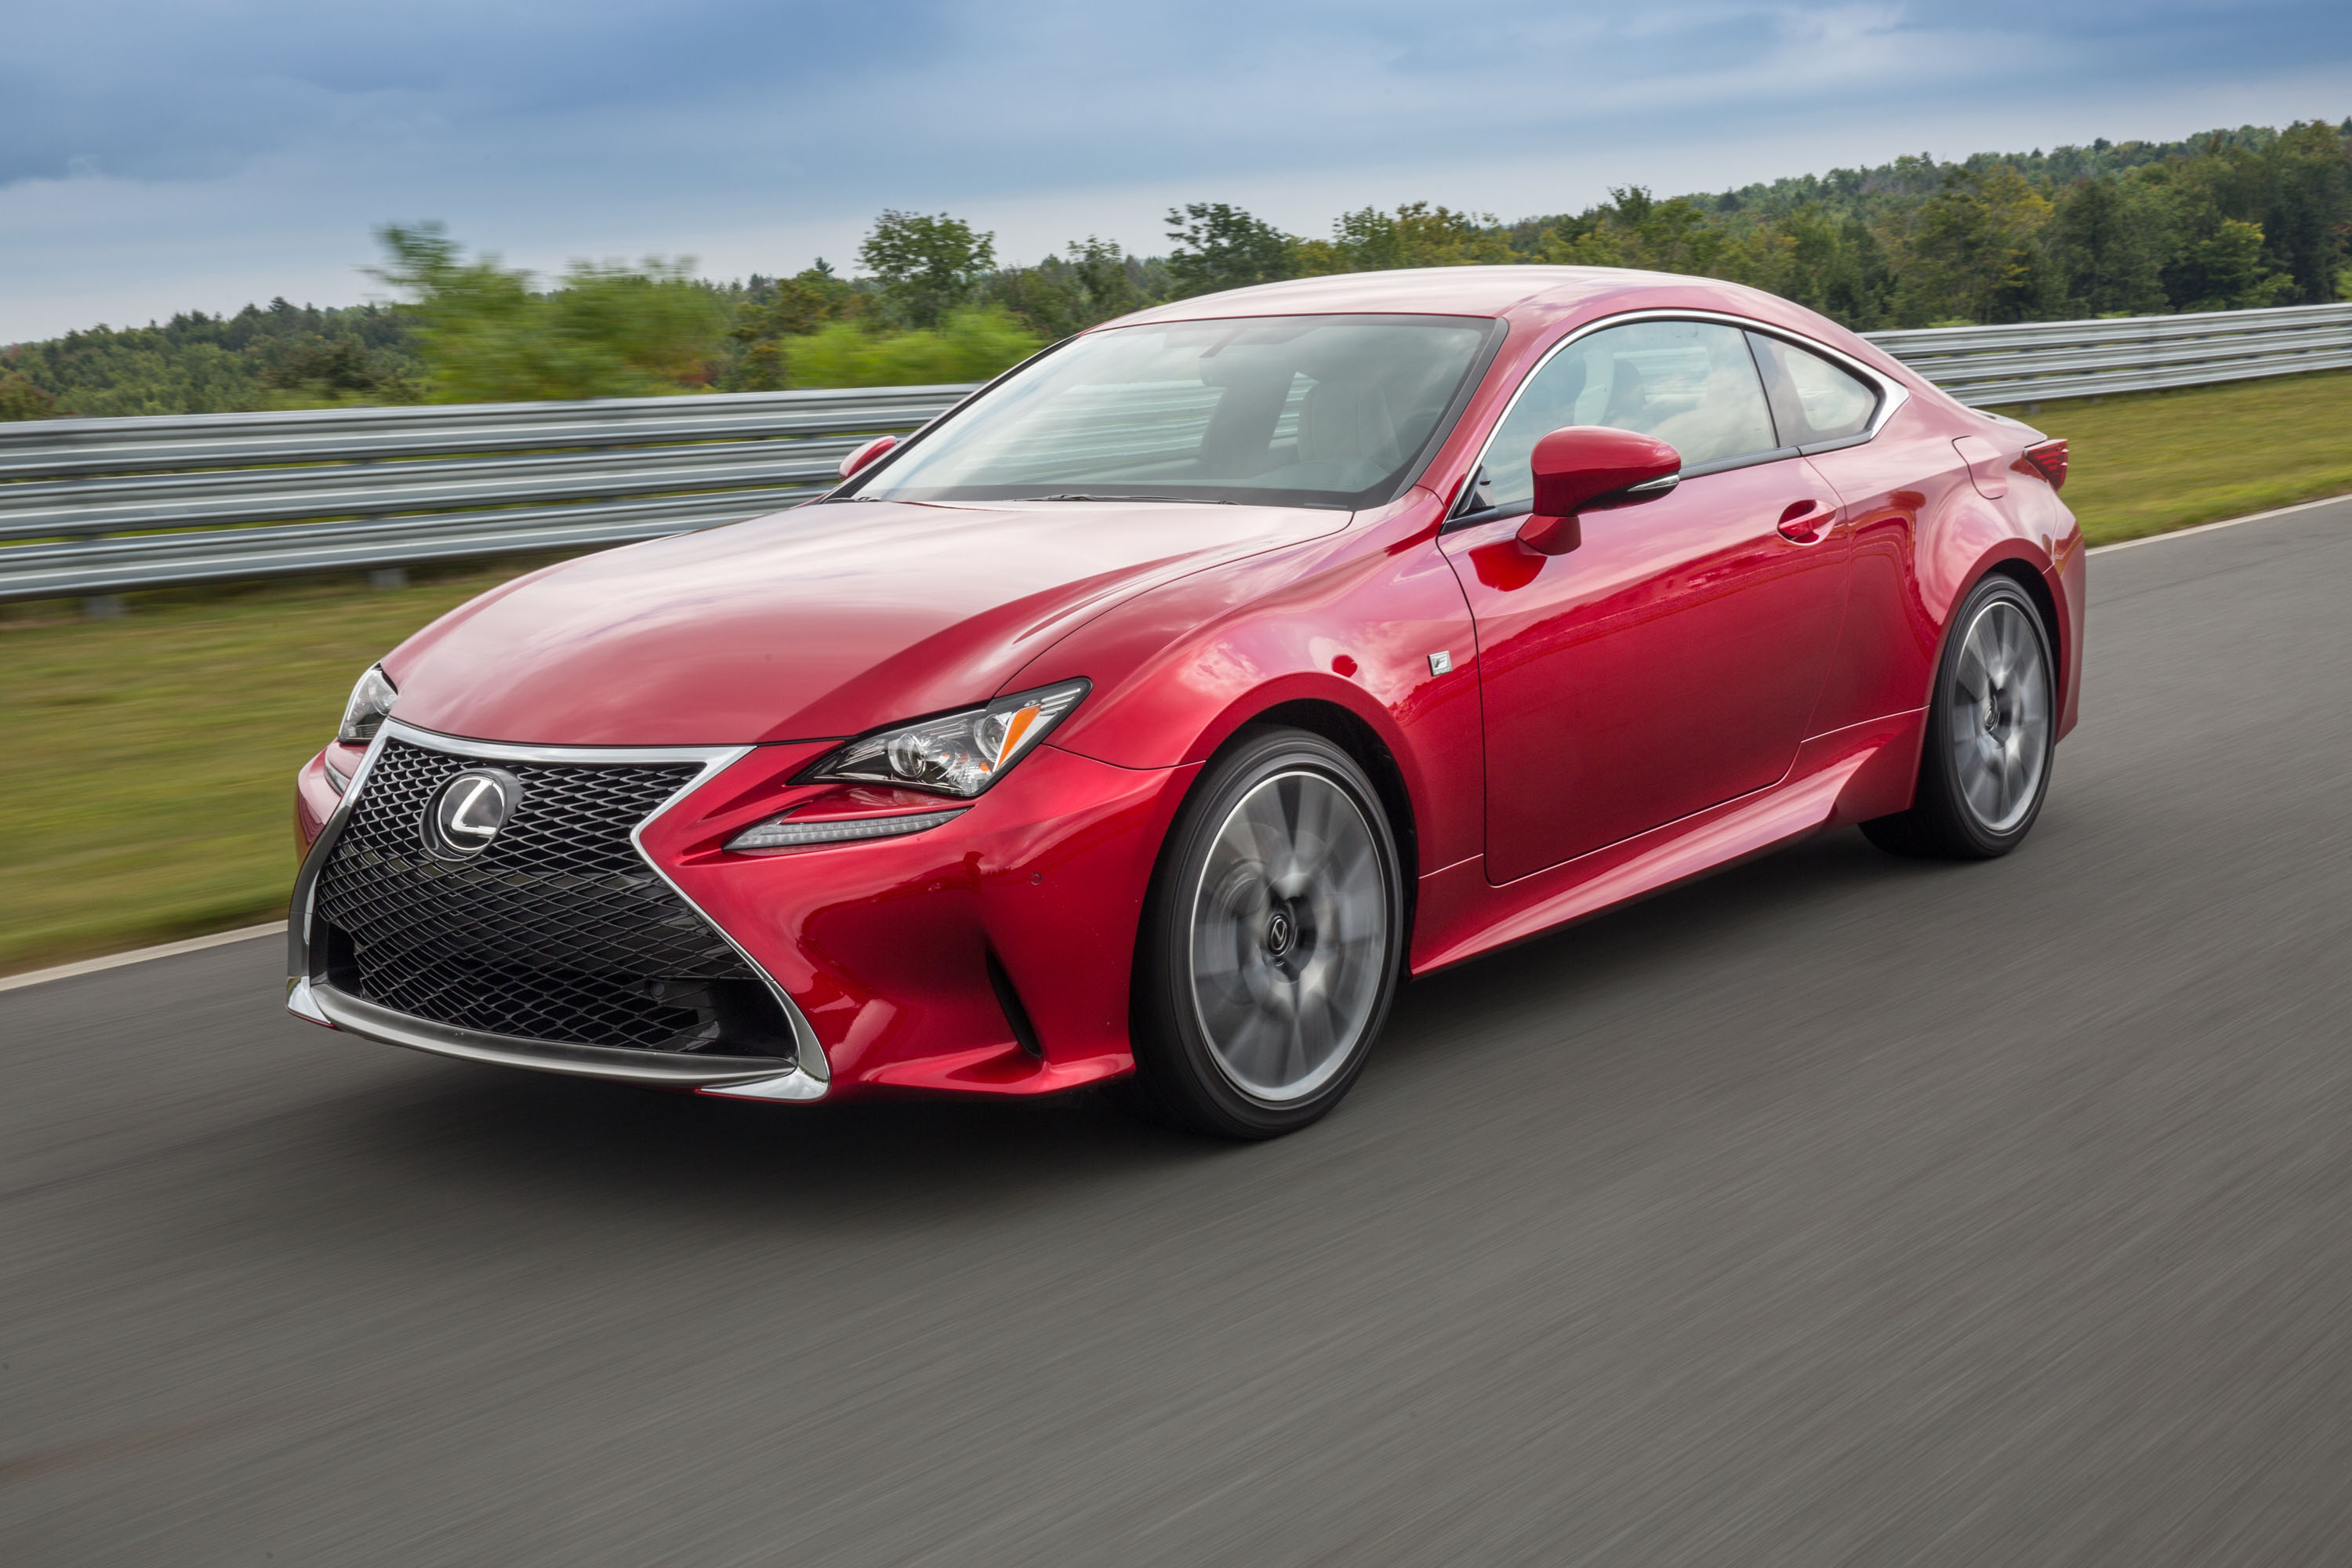 2017 Lexus Rc 350 Awd Not Quite A Sports Or Luxury Car But